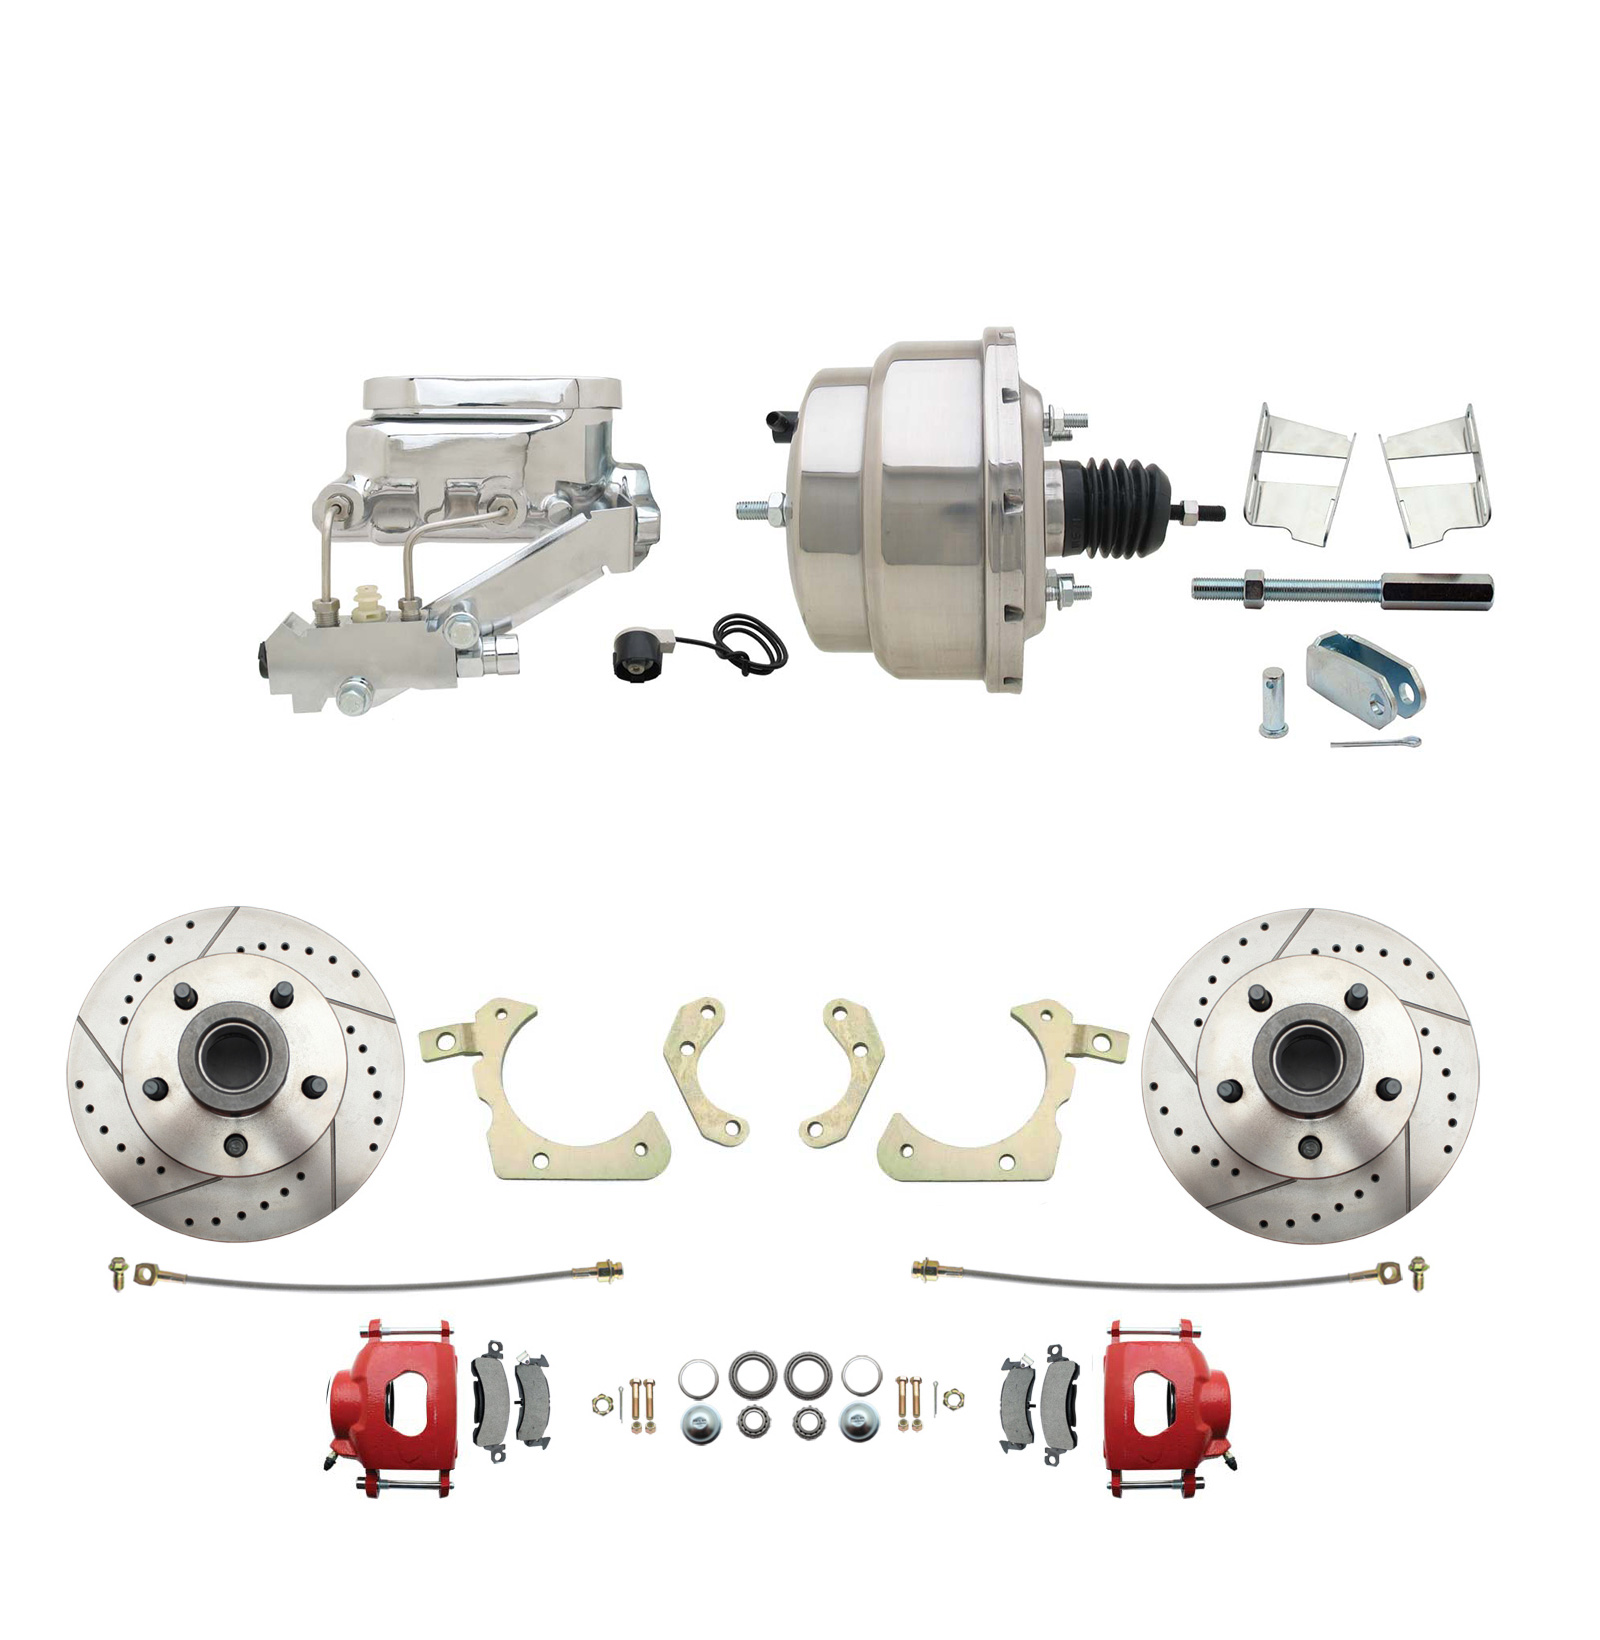 1959-1964 GM Full Size Front Disc Brake Kit Red Powder Coated Calipers Drilled/Slotted Rotors (Impala, Bel Air, Biscayne) & 8 Dual Stainless Steel Booster Conversion Kit W/ Chrome Flat Top Master Cylinder Left Mount Disc/ Dru